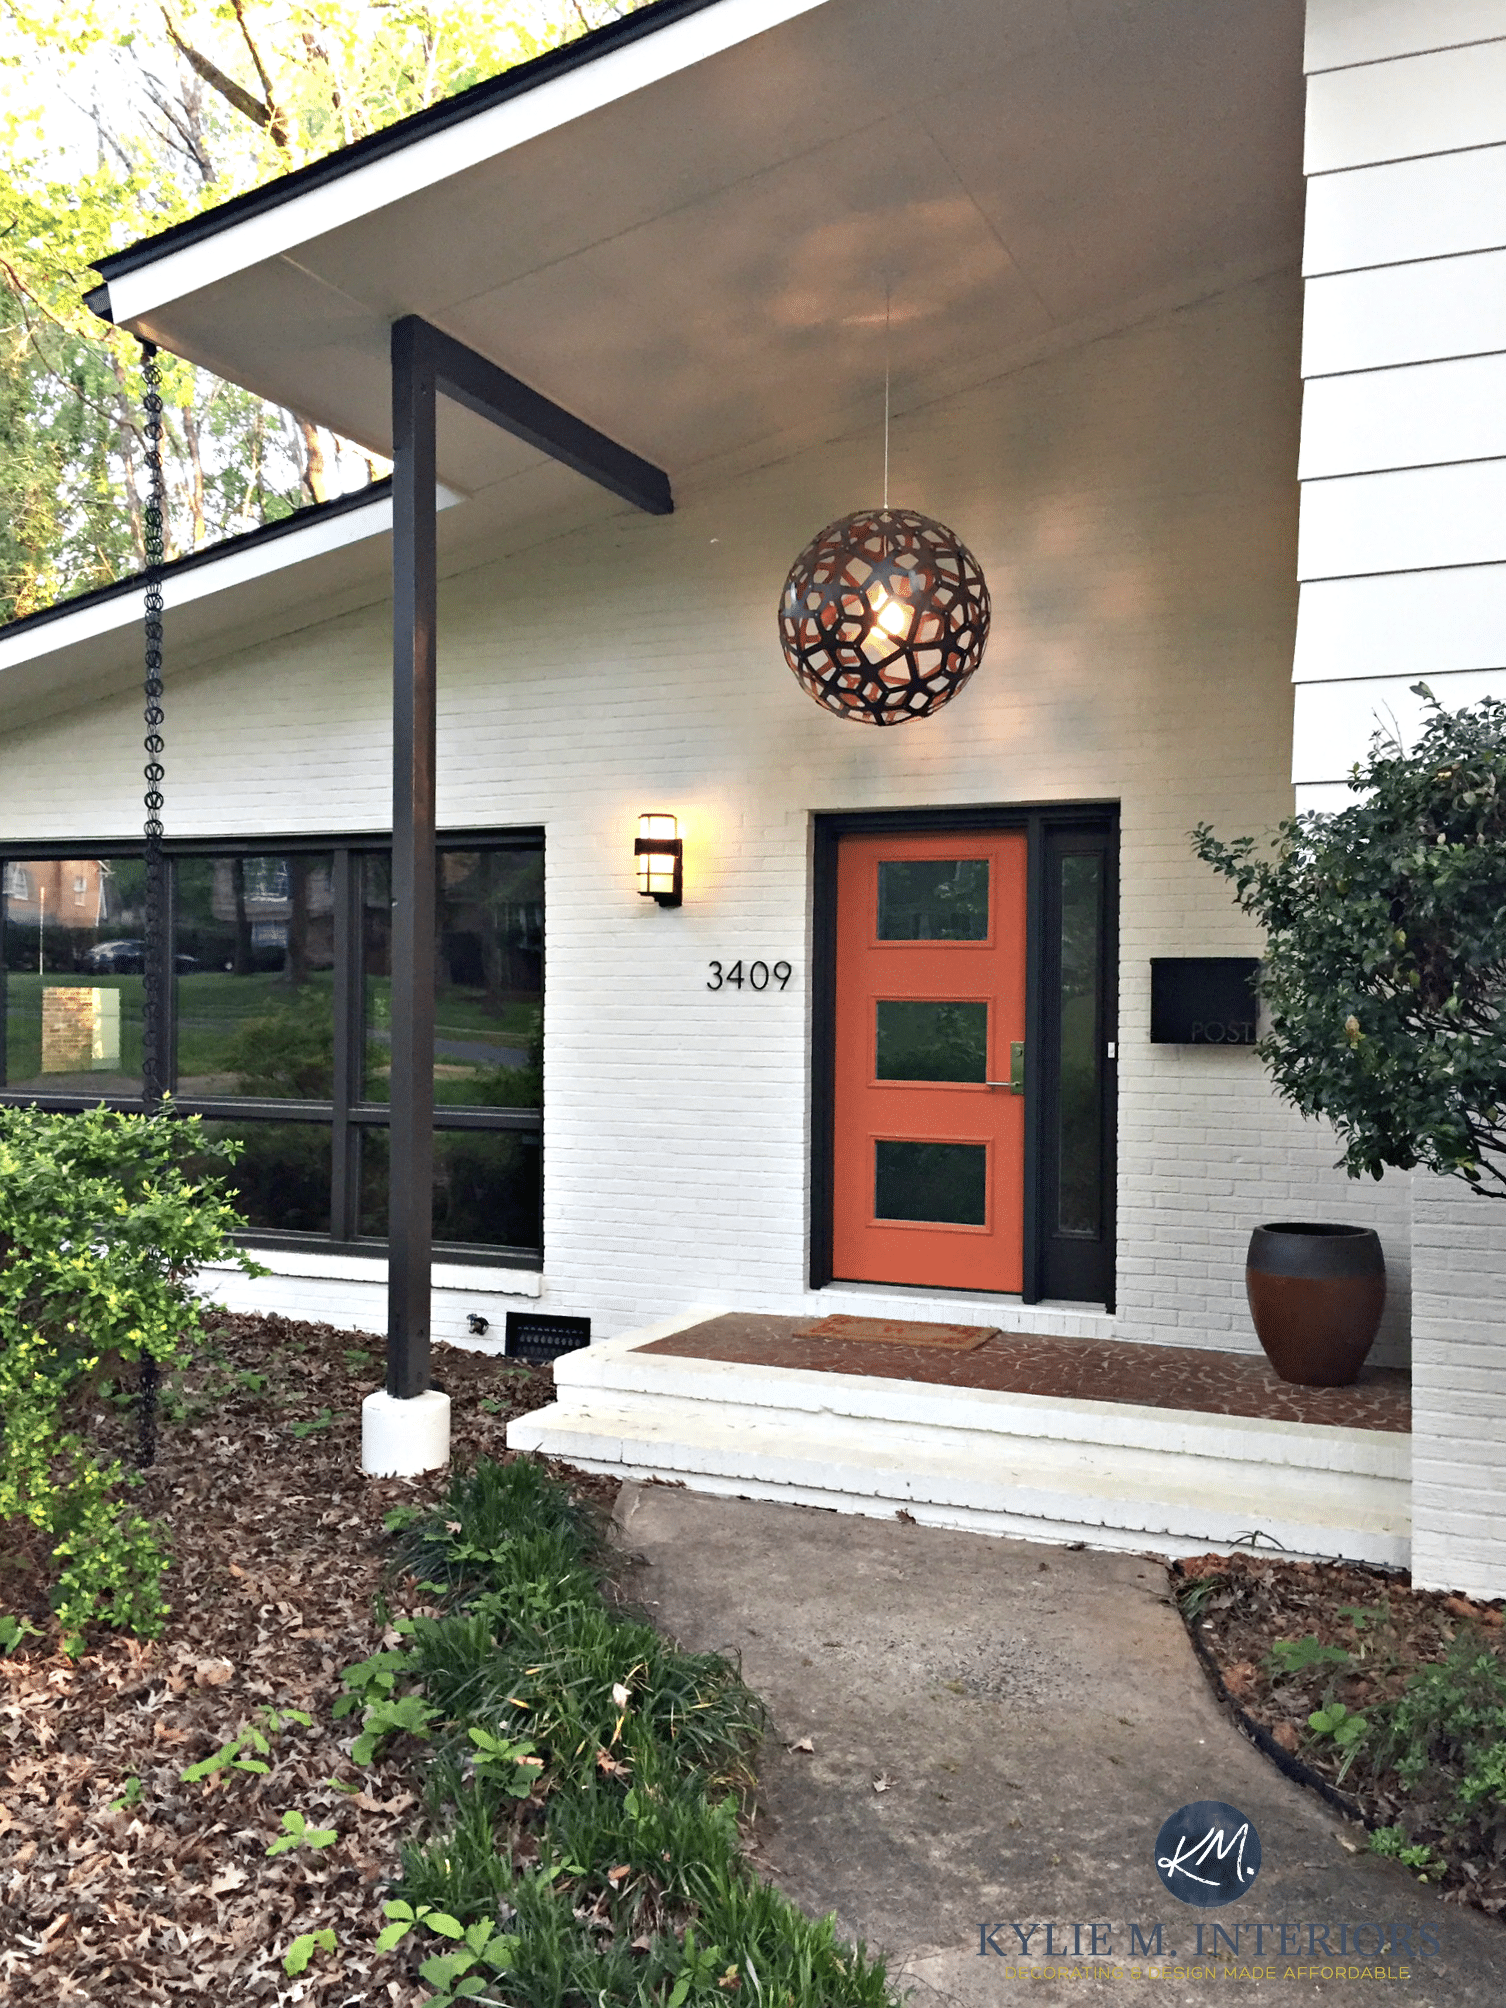 Exterior palette, cream, brown and orange. Subtle mid-century style with painted brick and siding on split level home. Kylie M Interiors E-design and Online Decorating and Colour Consulting